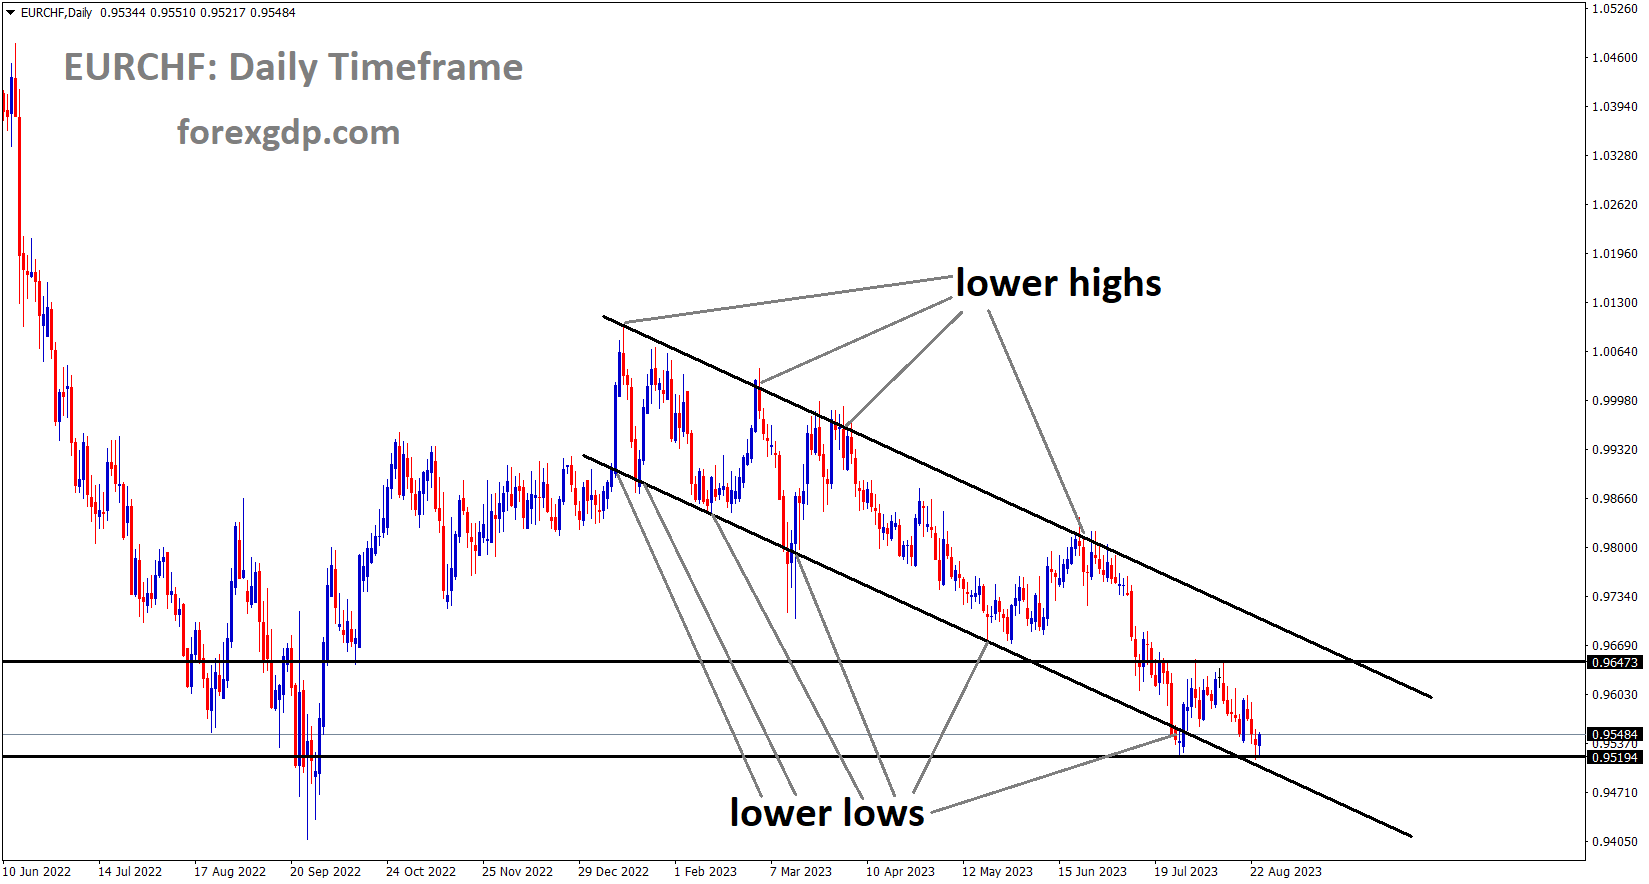 EURCHF is moving in the Descending channel and the market has reached the lower low area of the channel